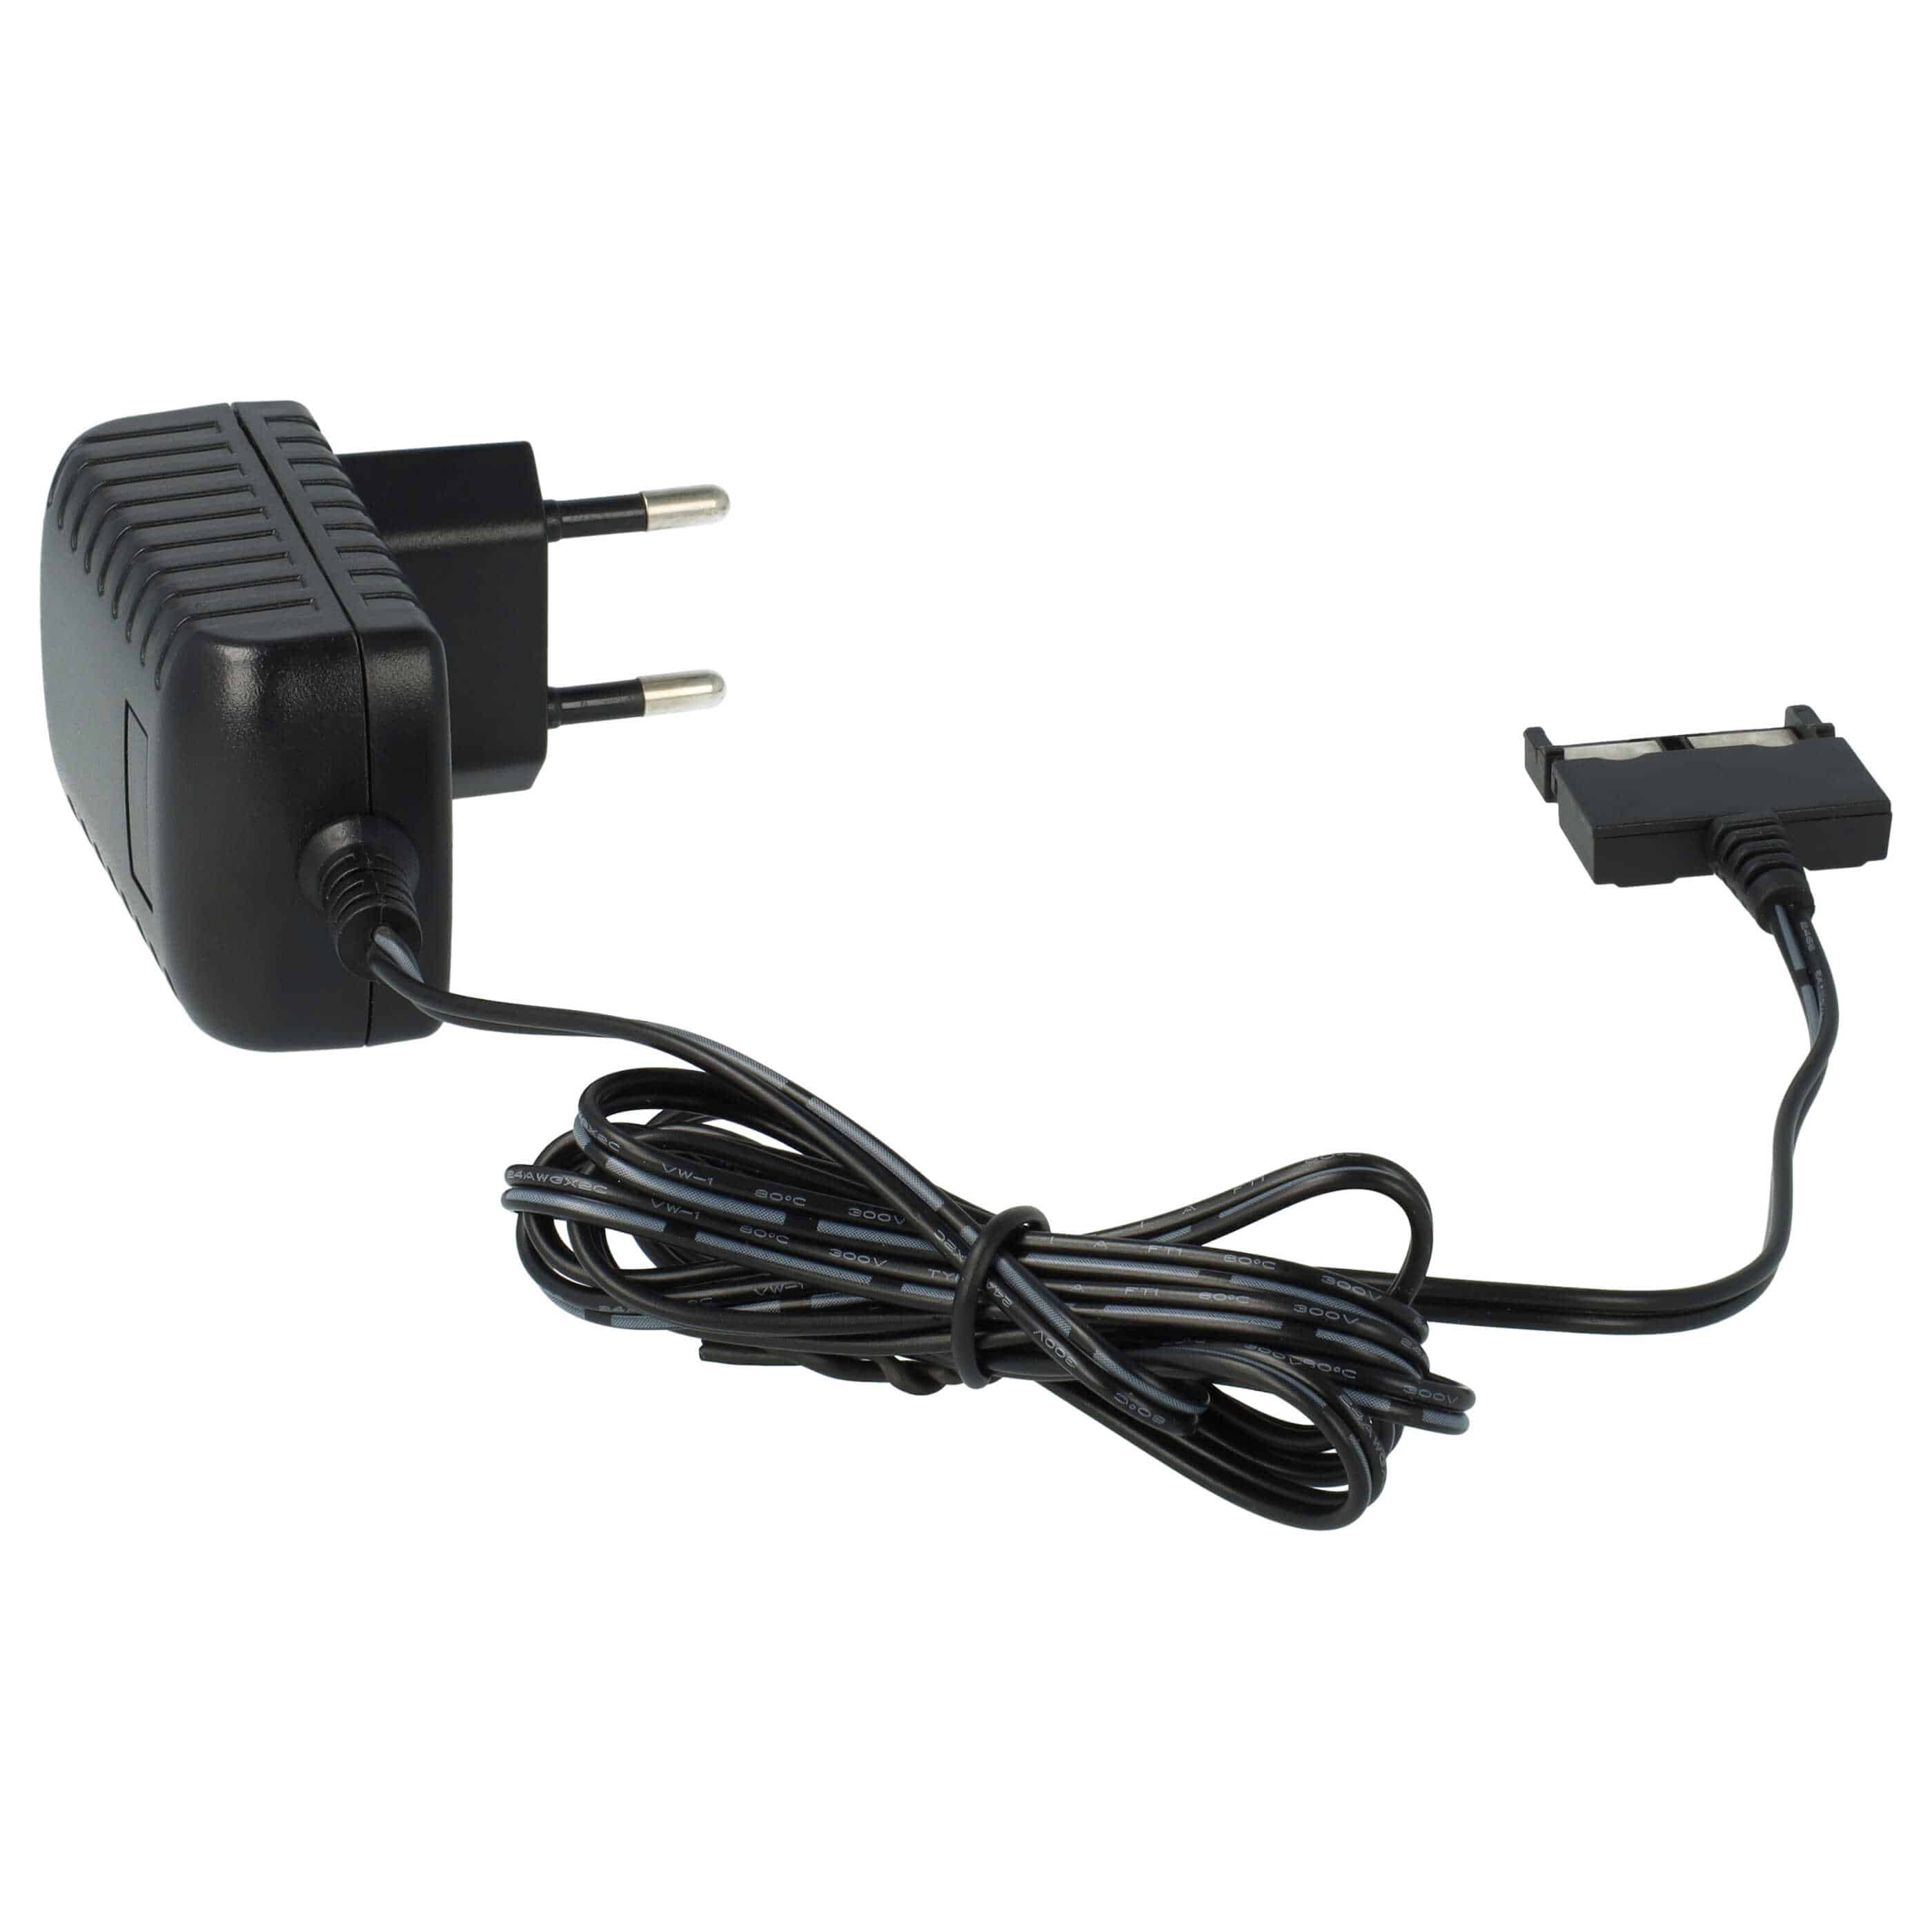 Mains Power Adapter replaces Gigaset C39280-Z4-C762 for Landline Telephone Charging Station - 150 cm